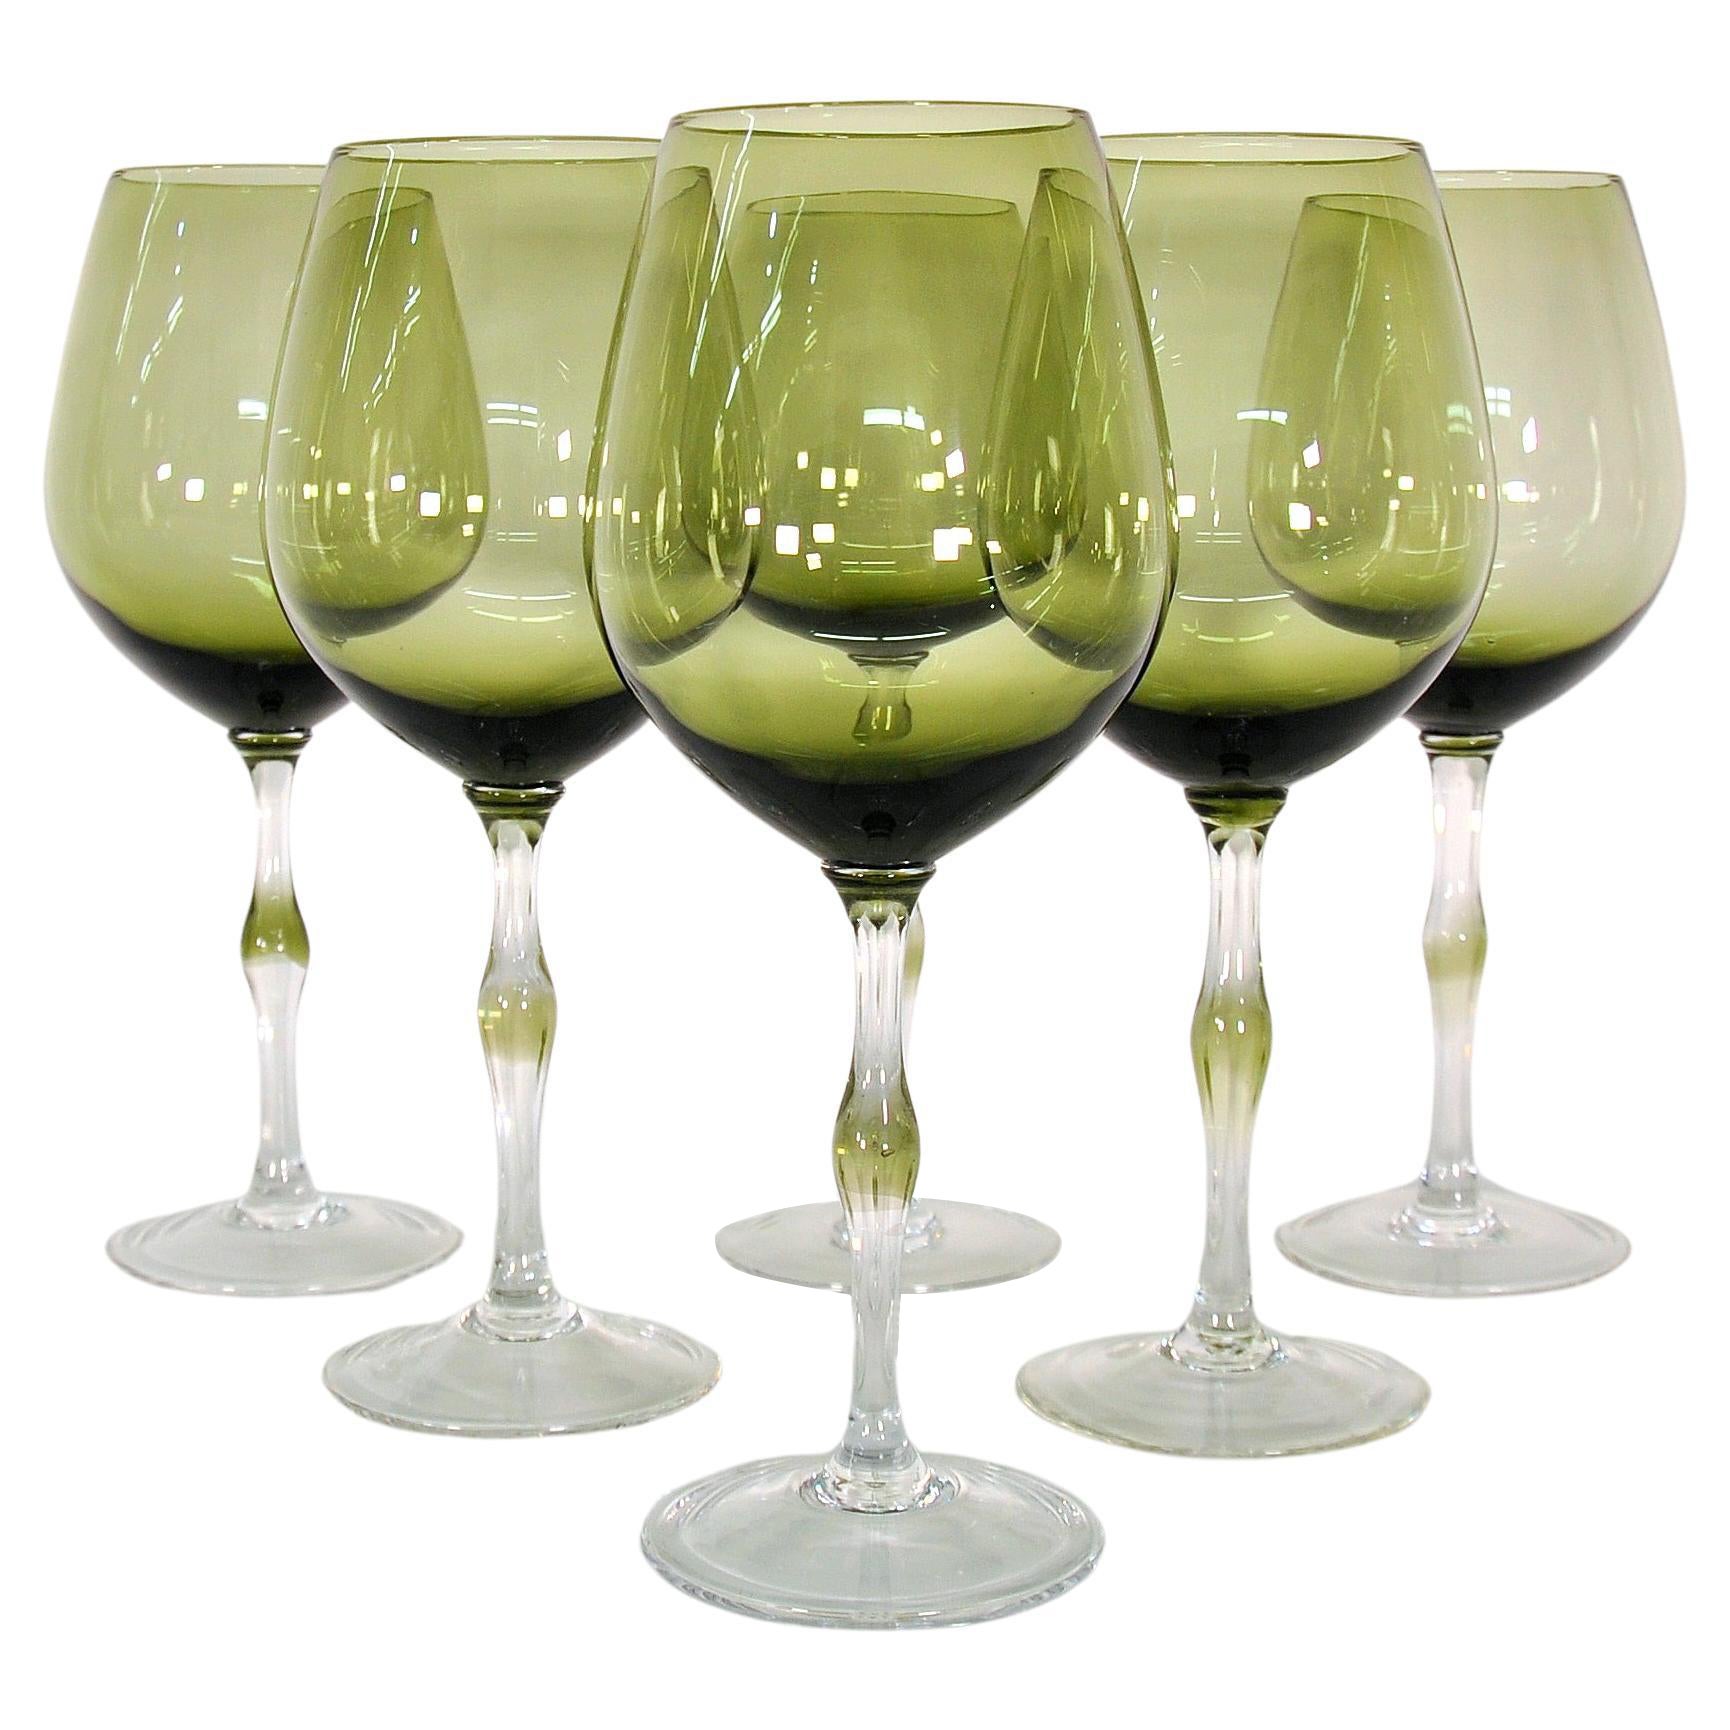 1 Piece Vintage Embossed Green Glasses Goblet Heavy Thick Dessert Wine  Glasses Goblets Stemware Side Water Whiskey Glass Cup